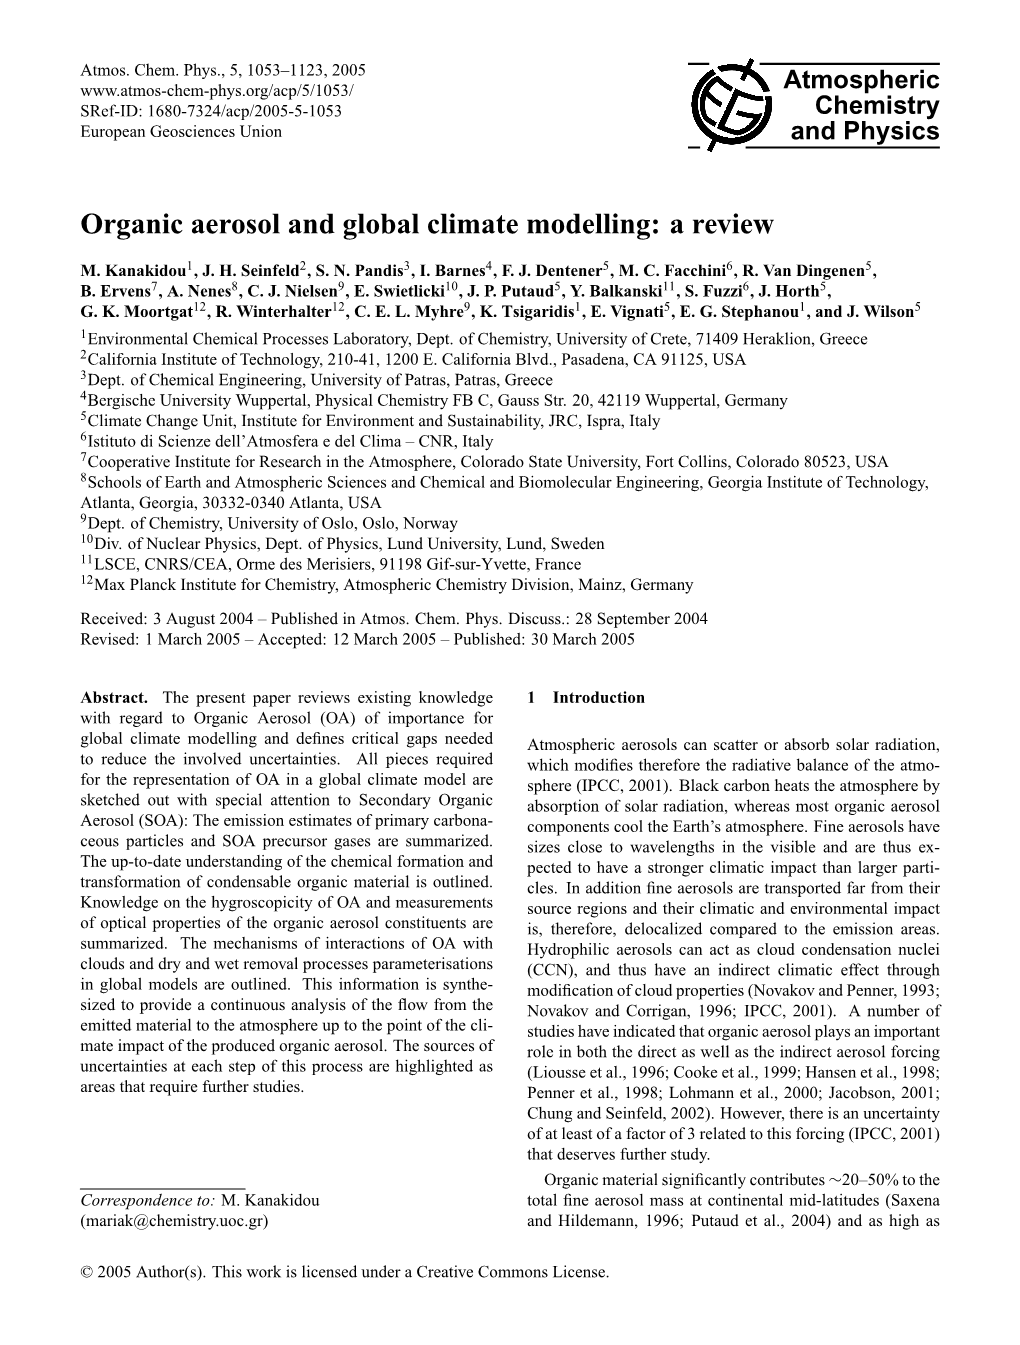 Organic Aerosol and Global Climate Modelling: a Review